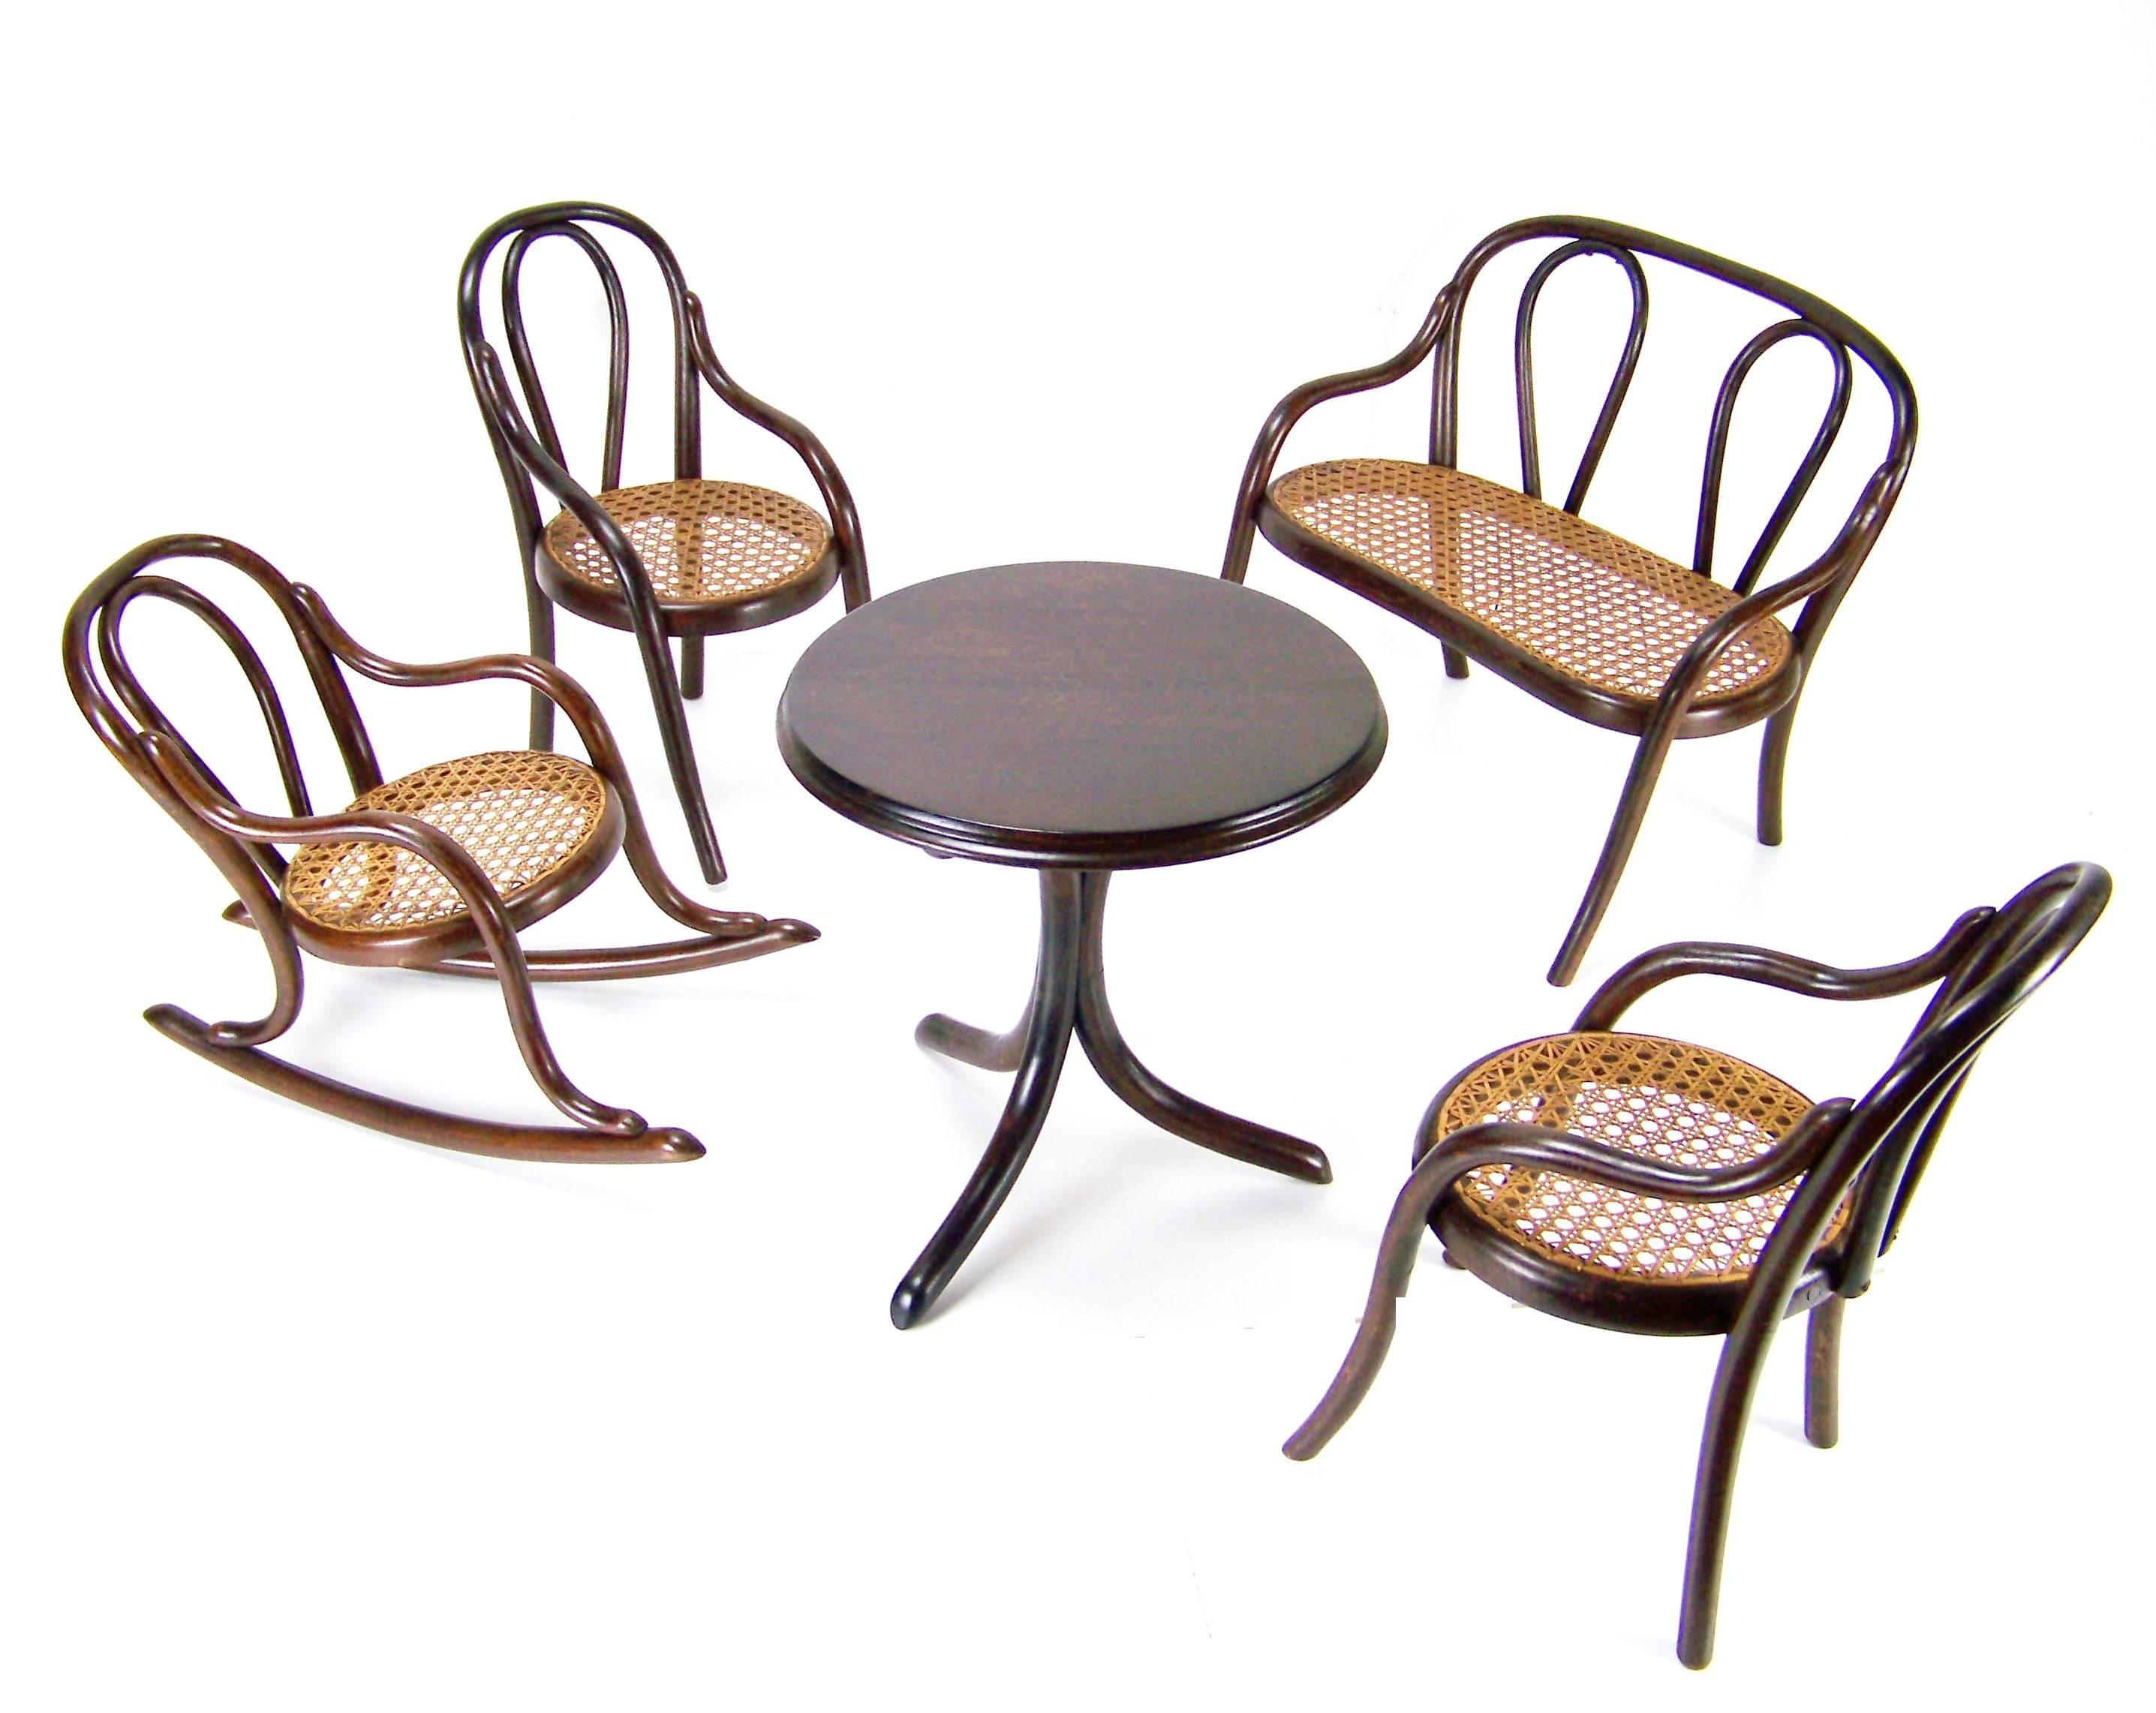 Manufactured in Austria by the Gebrüder Thonet Company. In the production program was included circa 1890. Newly restored.